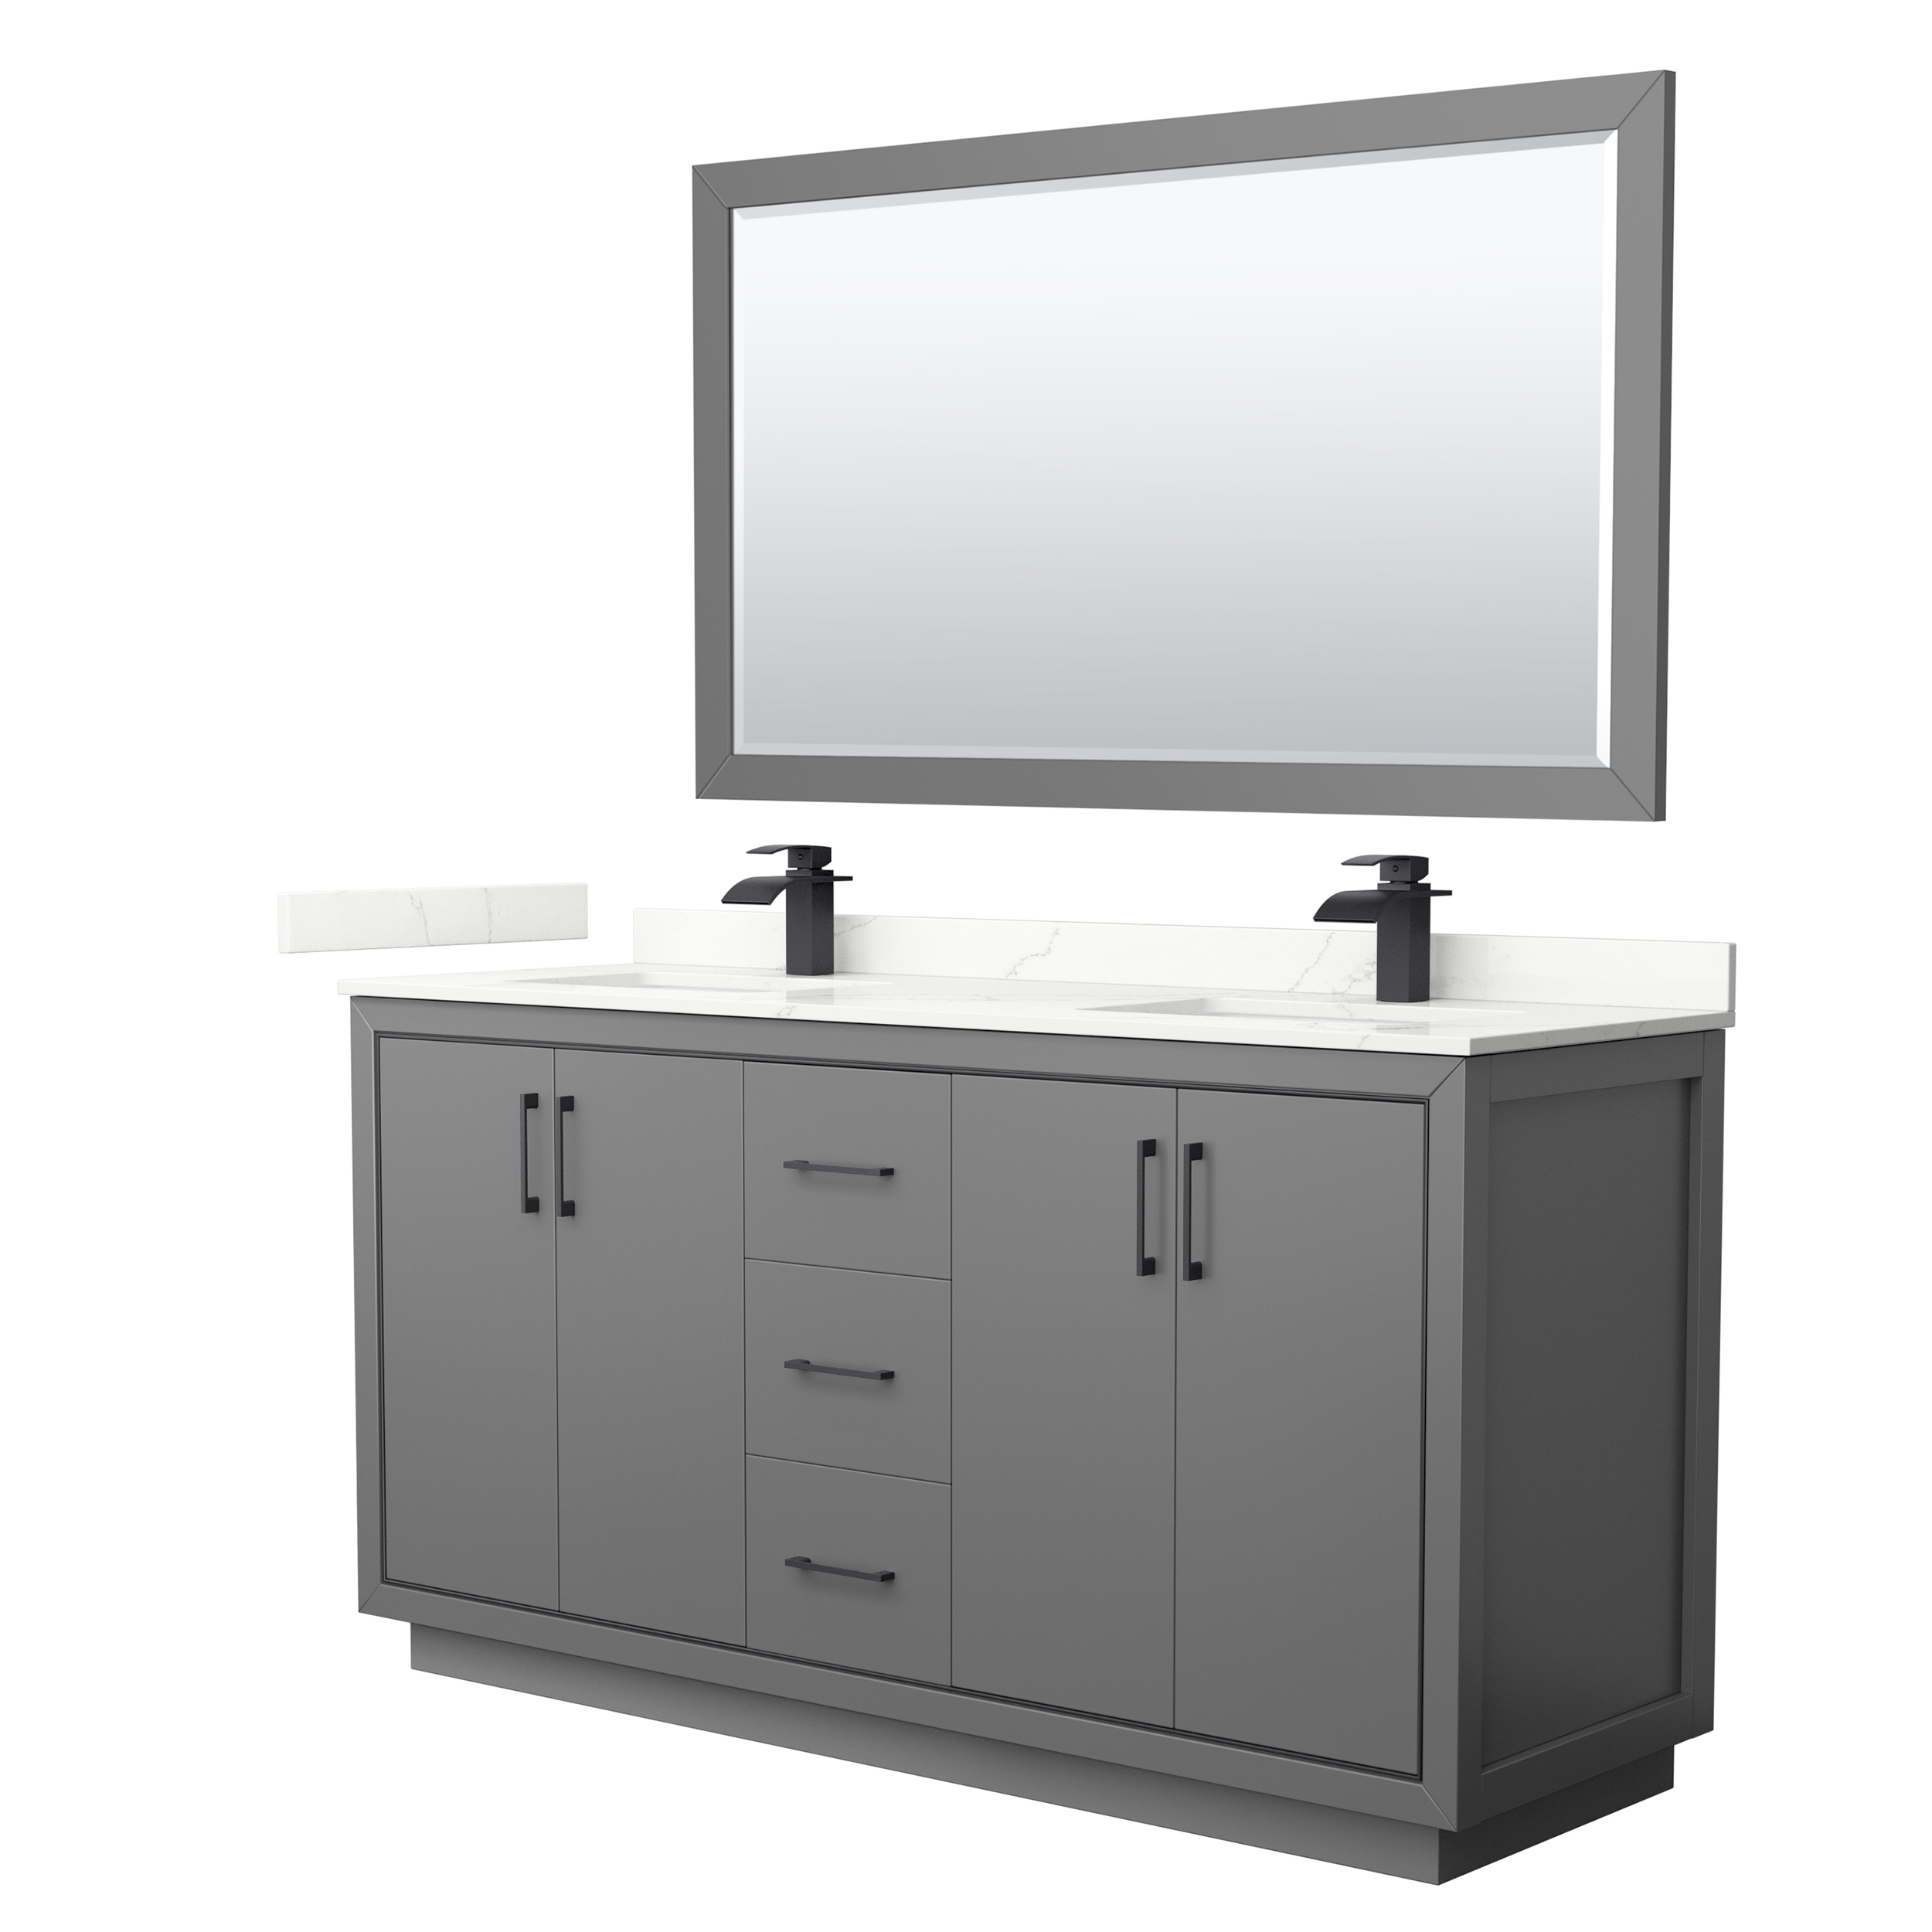 Icon 66" Double Vanity with optional Quartz or Carrara Marble Counter - Dark Gray WC-1111-66-DBL-VAN-DKG_